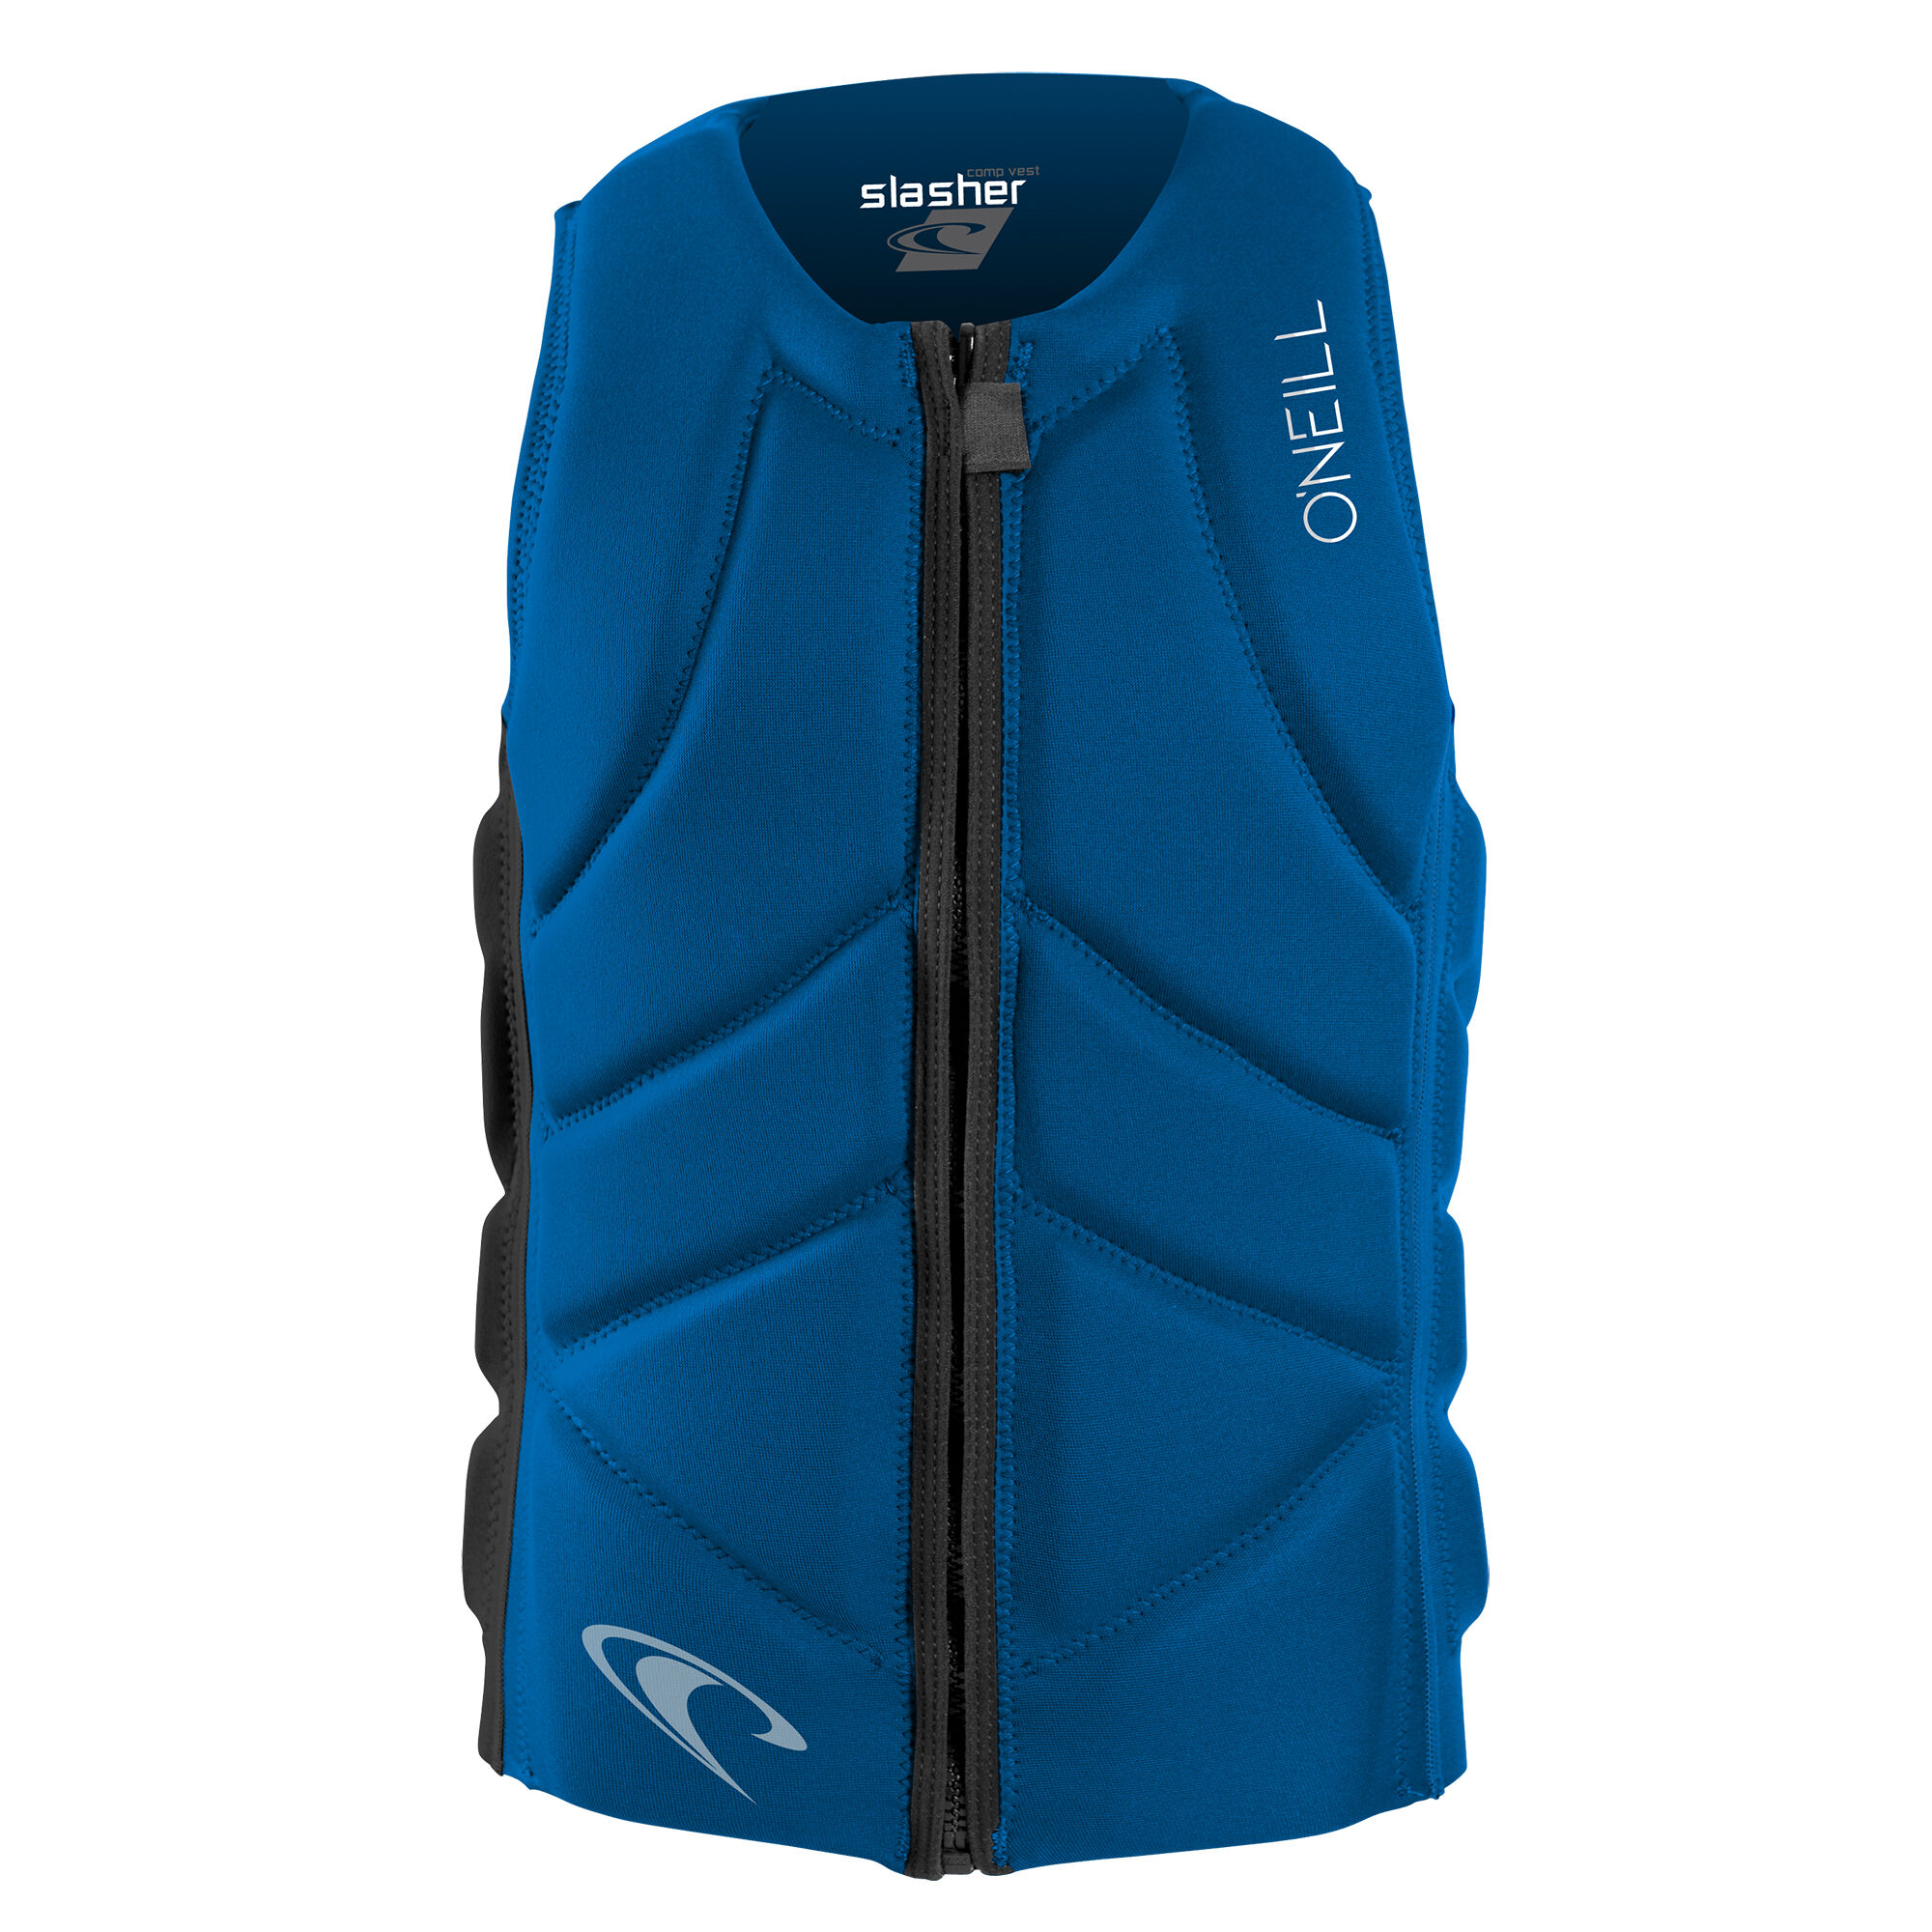 Photos - Life Jacket ONeill O'Neill s Slasher Competition Watersports Vest - Blue/Black - S 4917er9s 